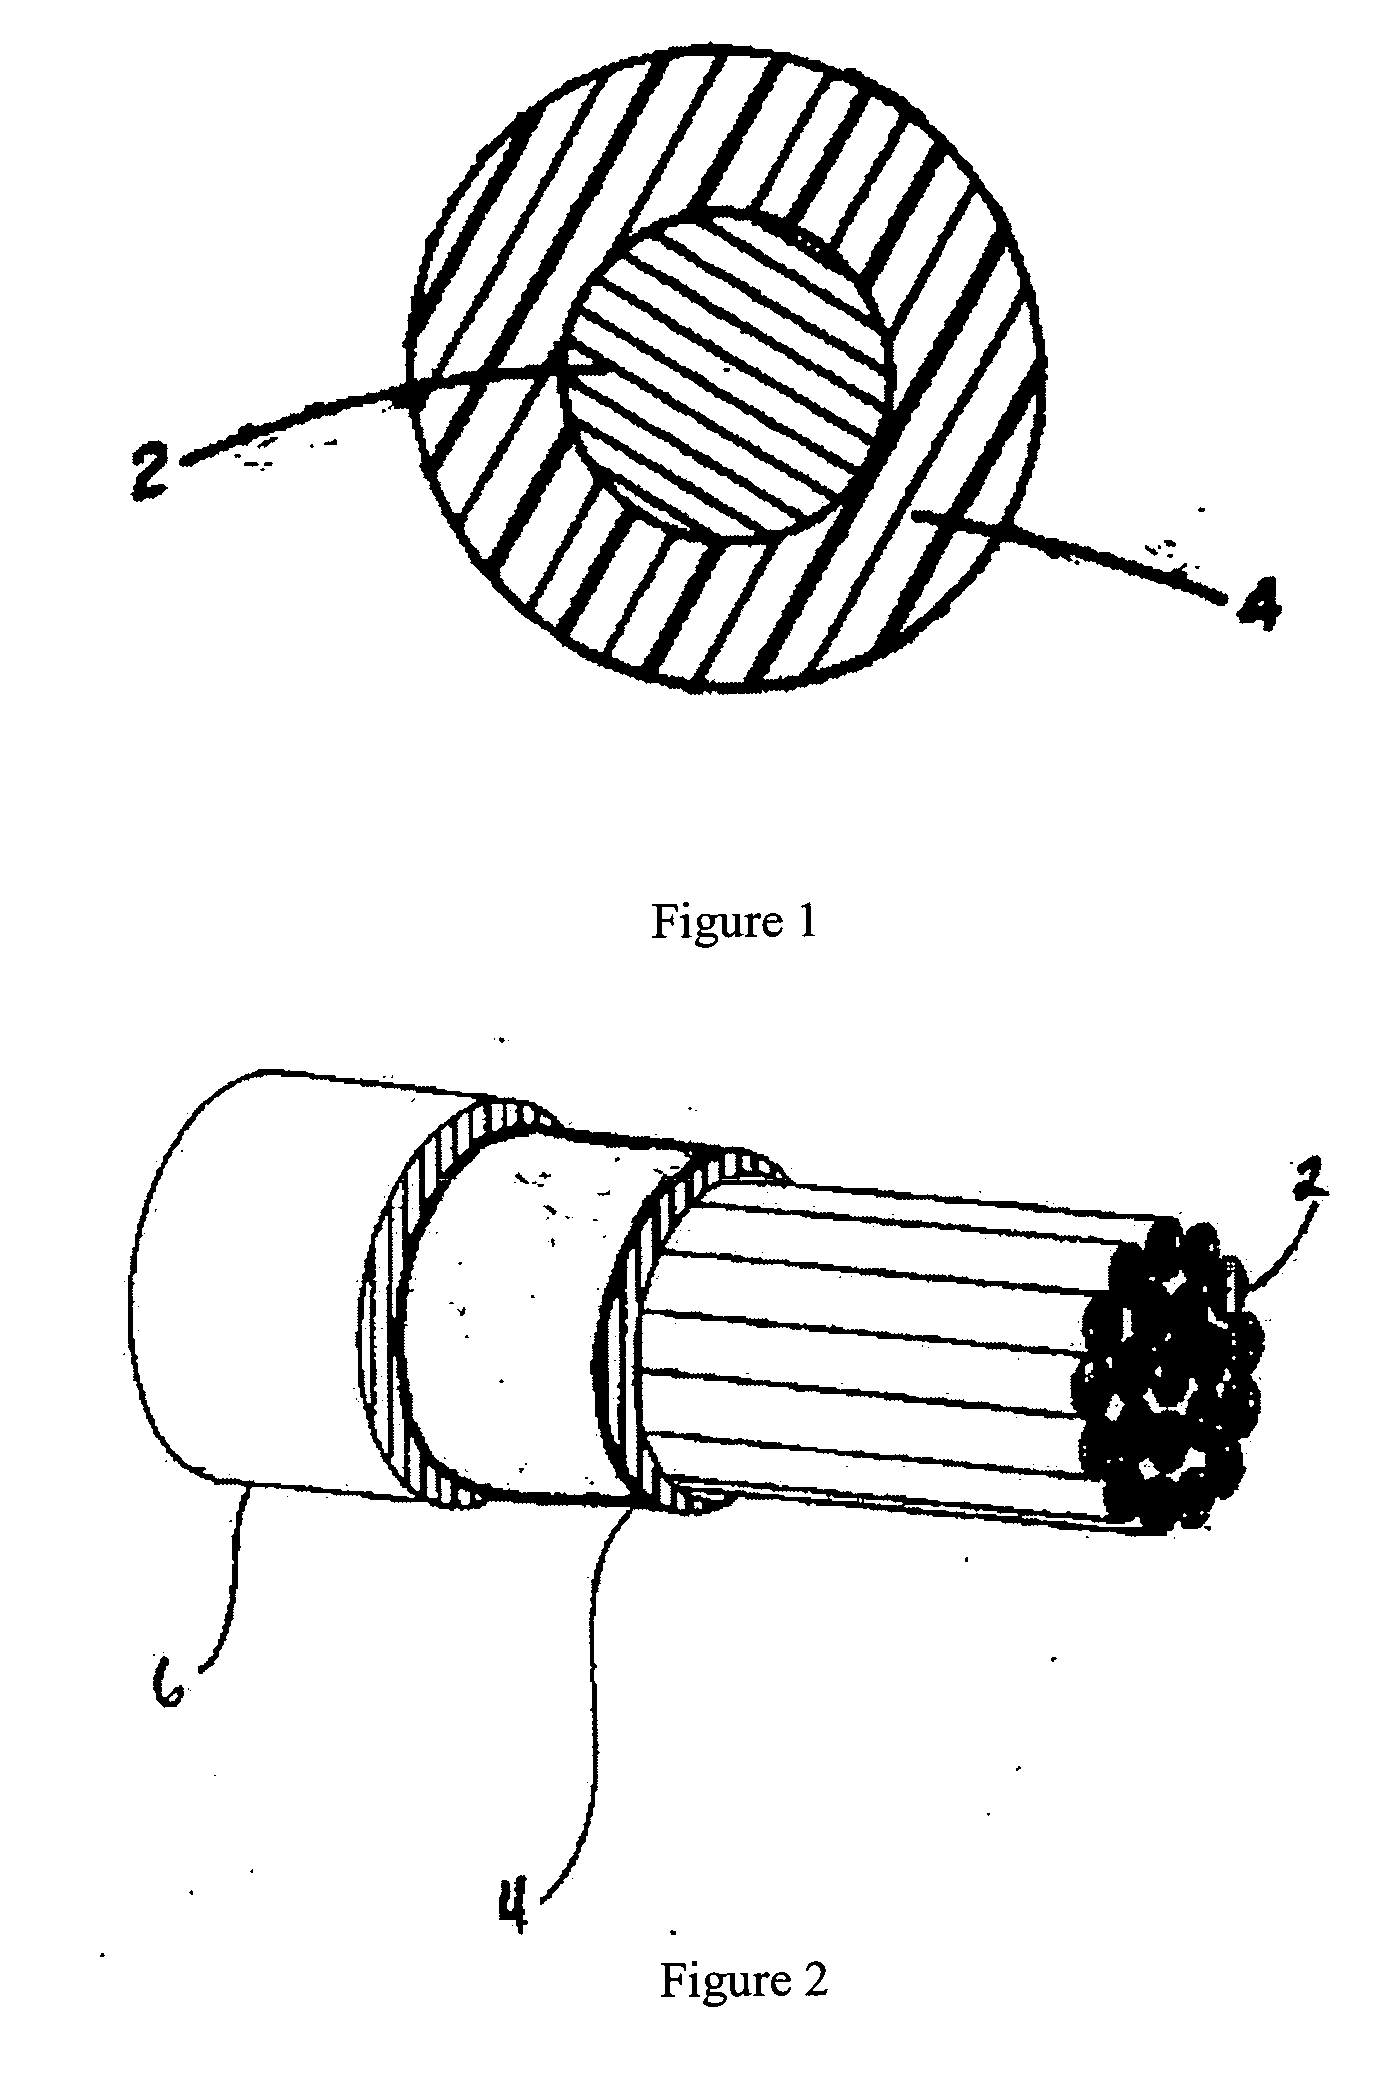 Flame retardant electrical wire